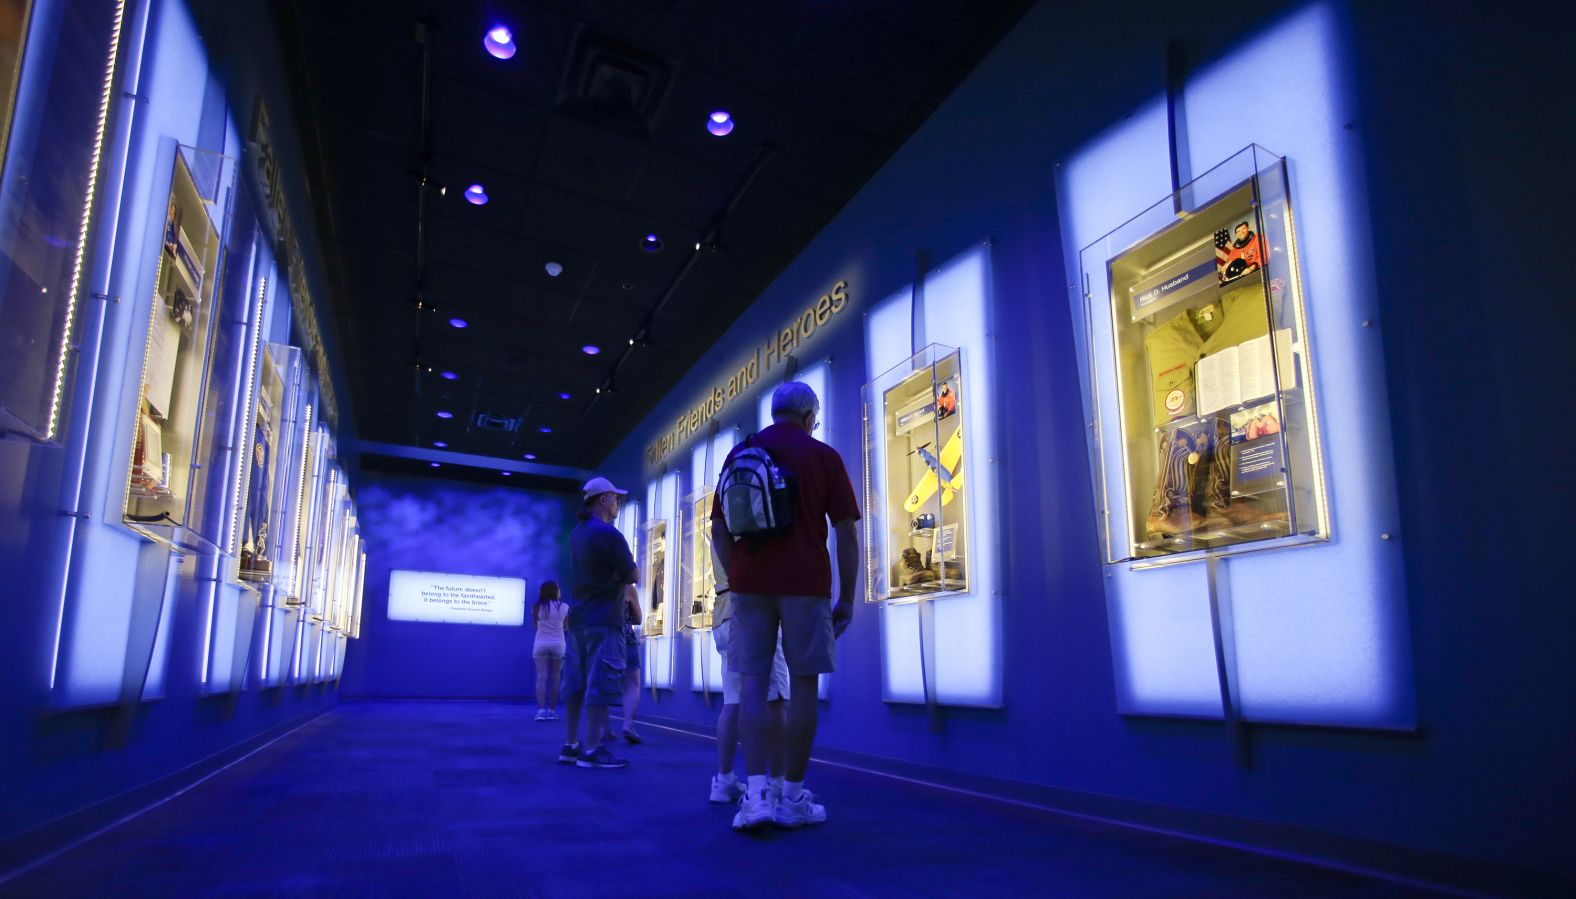 Visitors look at display cases at the "Forever Remembered" exhibit for the astronauts who died on the Columbia and Challenger space shuttles, at the Kennedy Space Center Visitor Complex in Florida, on July 21, 2015. <a href="index.php?page=&url=https%3A%2F%2Fwww.kennedyspacecenter.com%2Fexplore-attractions%2Fshuttle-a-ship-like-no-other%2Fforever-remembered" target="_blank" target="_blank">The exhibit</a> is permanent and "displays personal items from each astronaut and recovered hardware from both orbiters, including a section of Challenger's left fuselage with American flag and the framework of Columbia's cockpit windows," according to the Kennedy Space Center website.